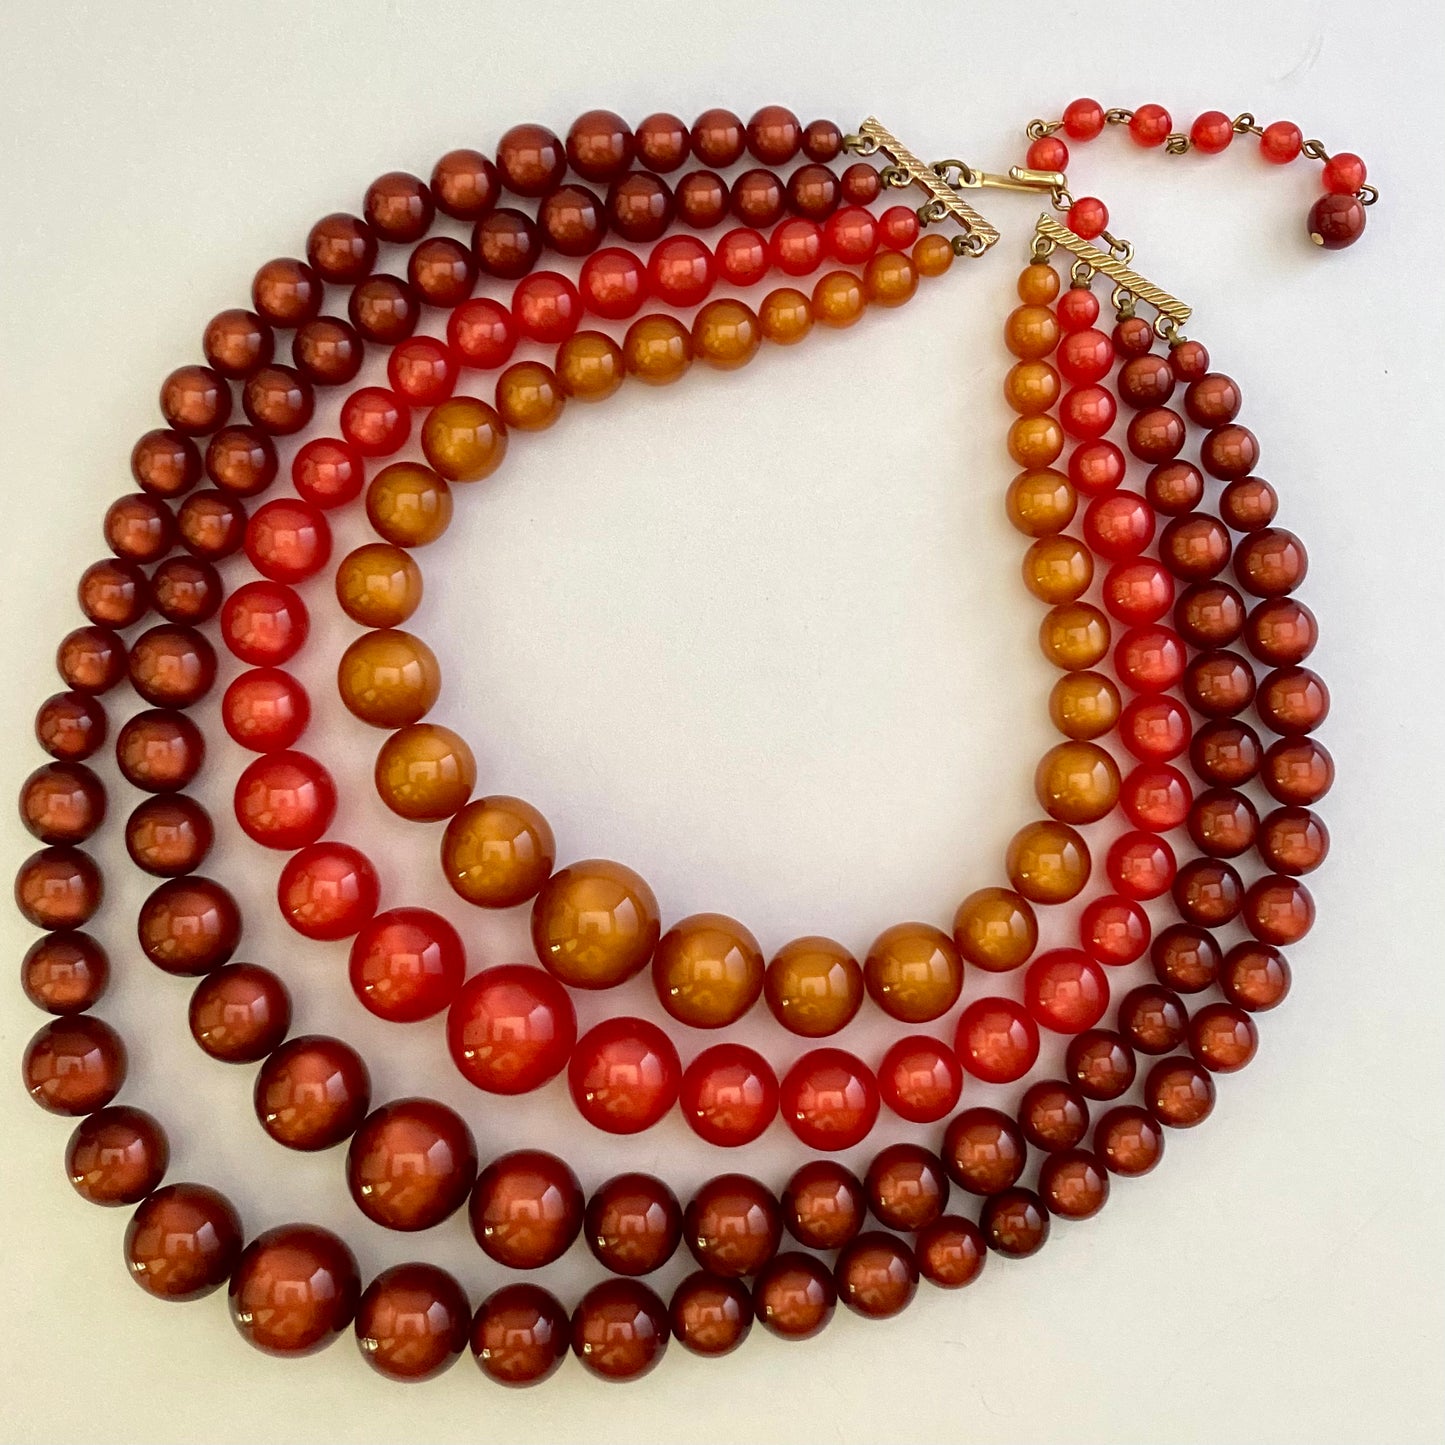 1960s 4 Strand Moonglow Bead Necklace